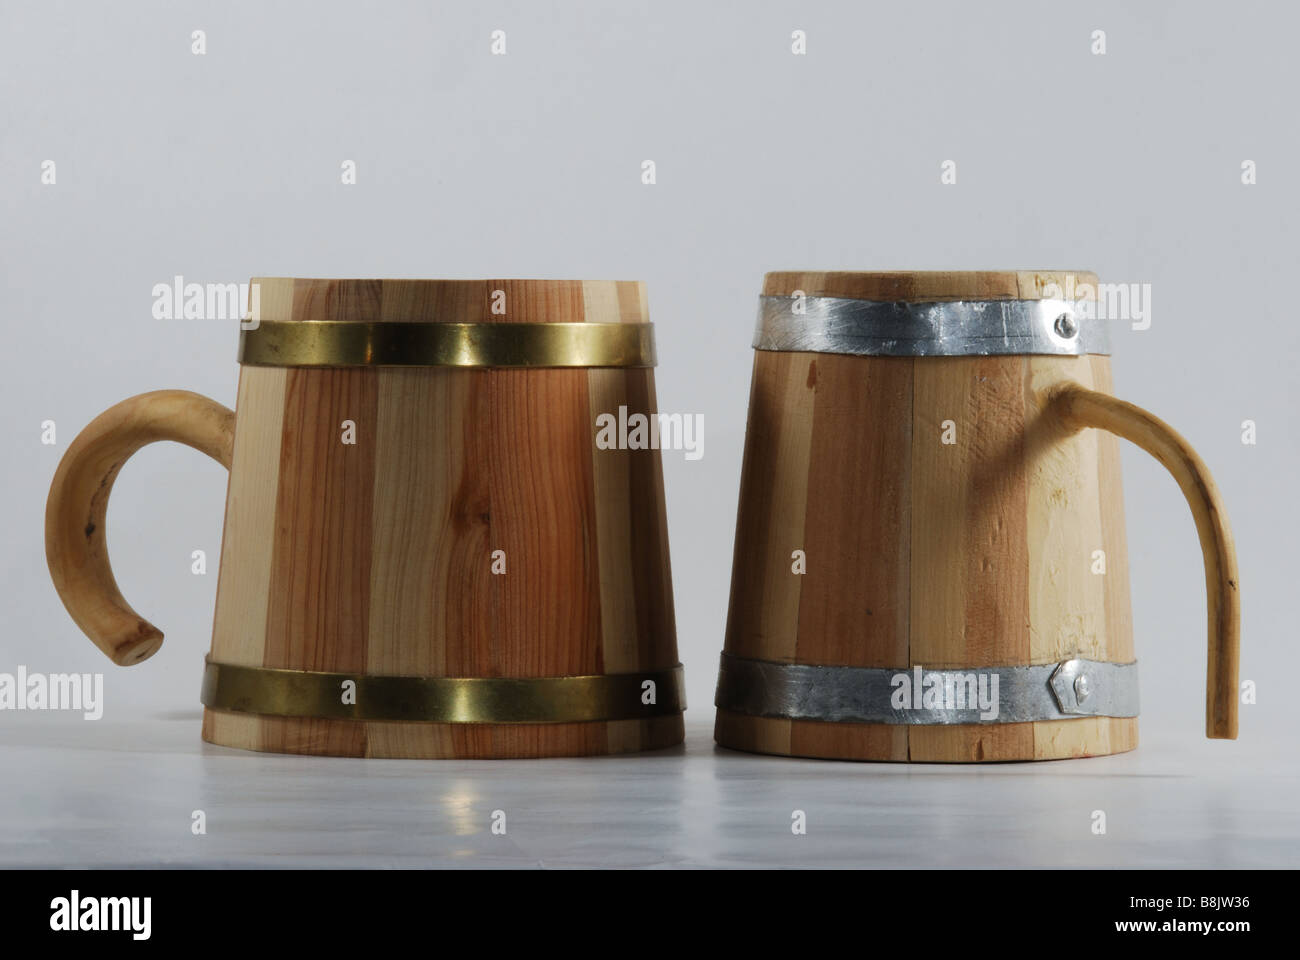 Croatian wooden cups called Bukara traditionally used for drinking wine Stock Photo